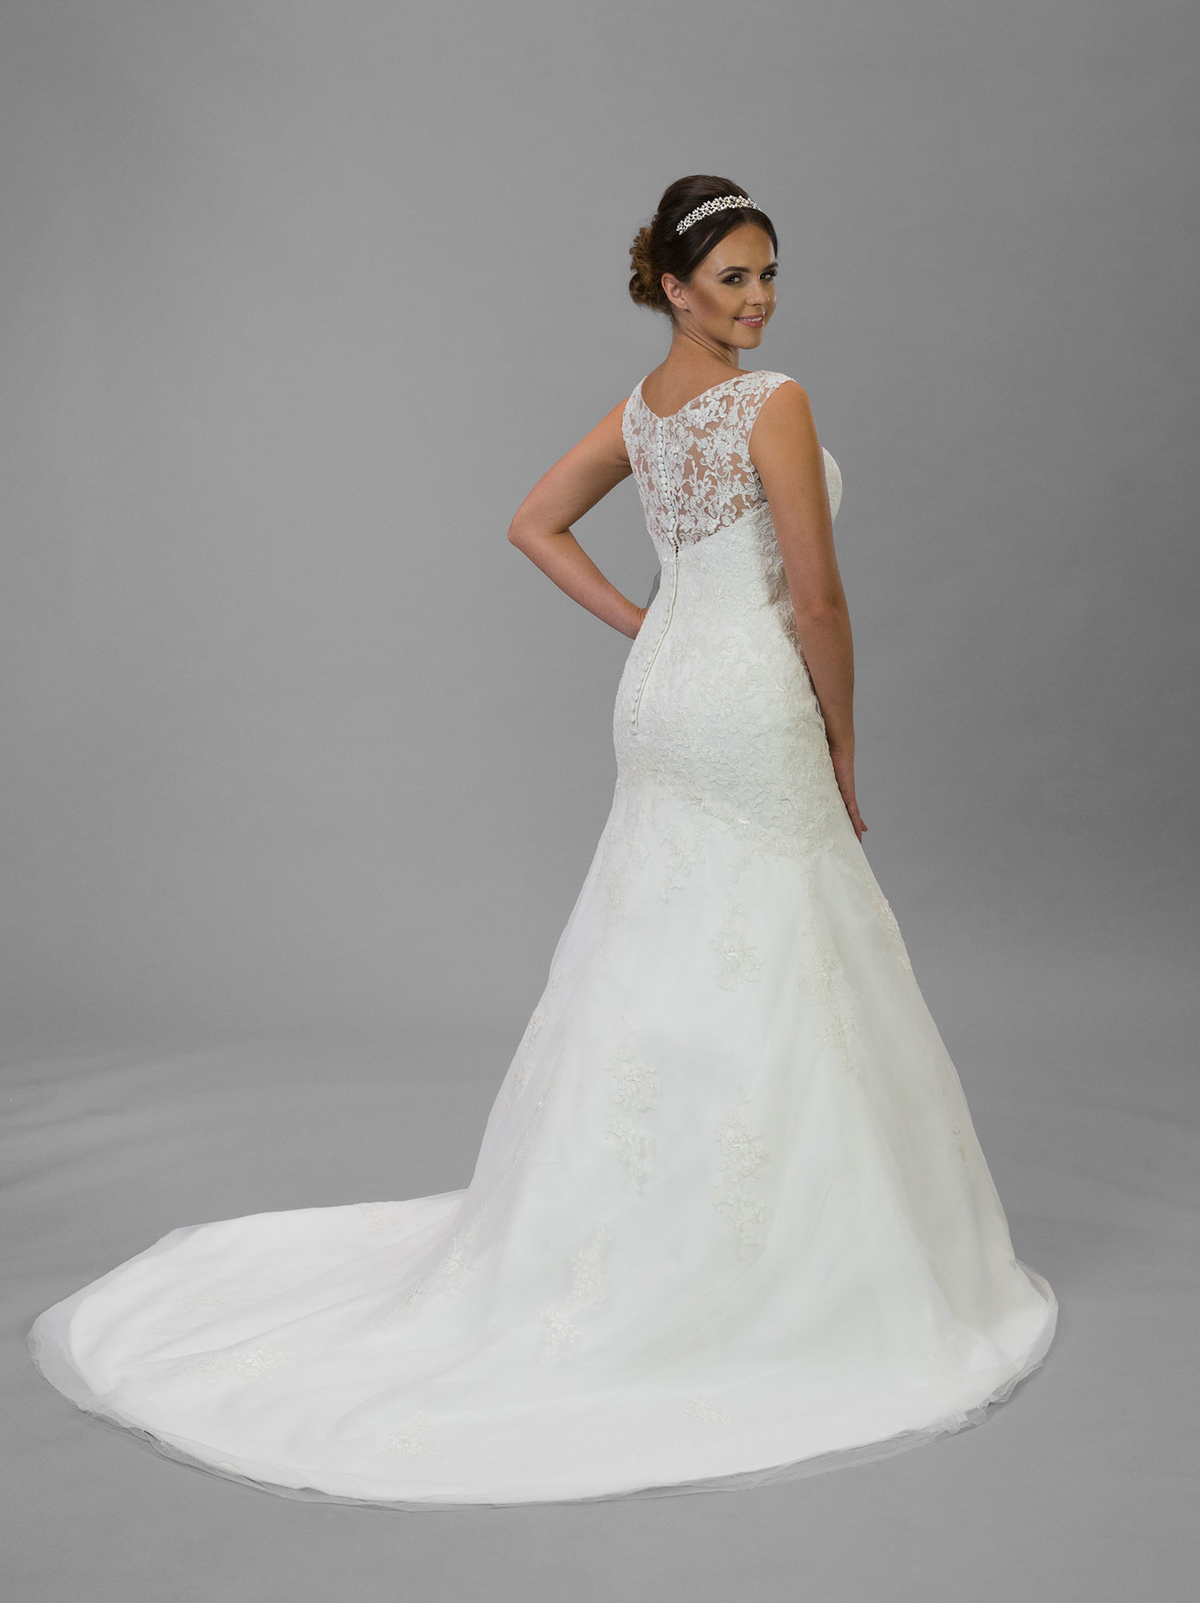 WD092 | Full Lace Fishtail Gown | British Bridal